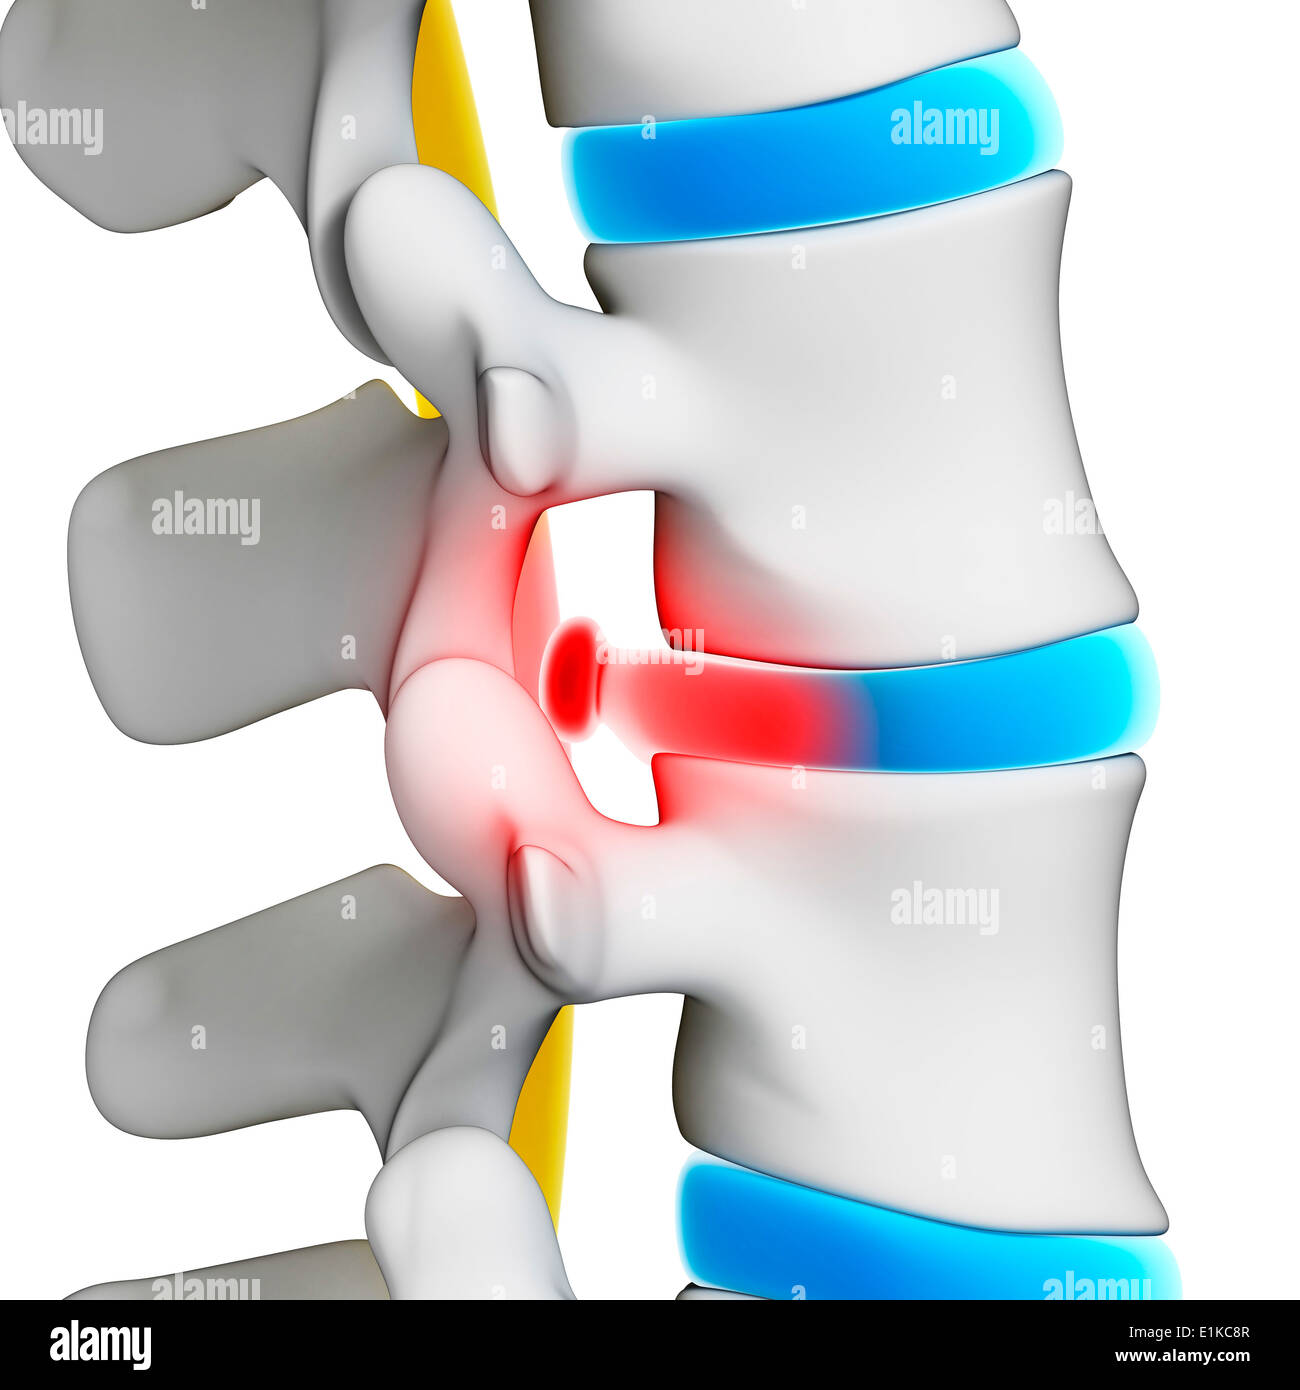 Human spinal disc herniation (slipped disc) computer artwork. Stock Photo